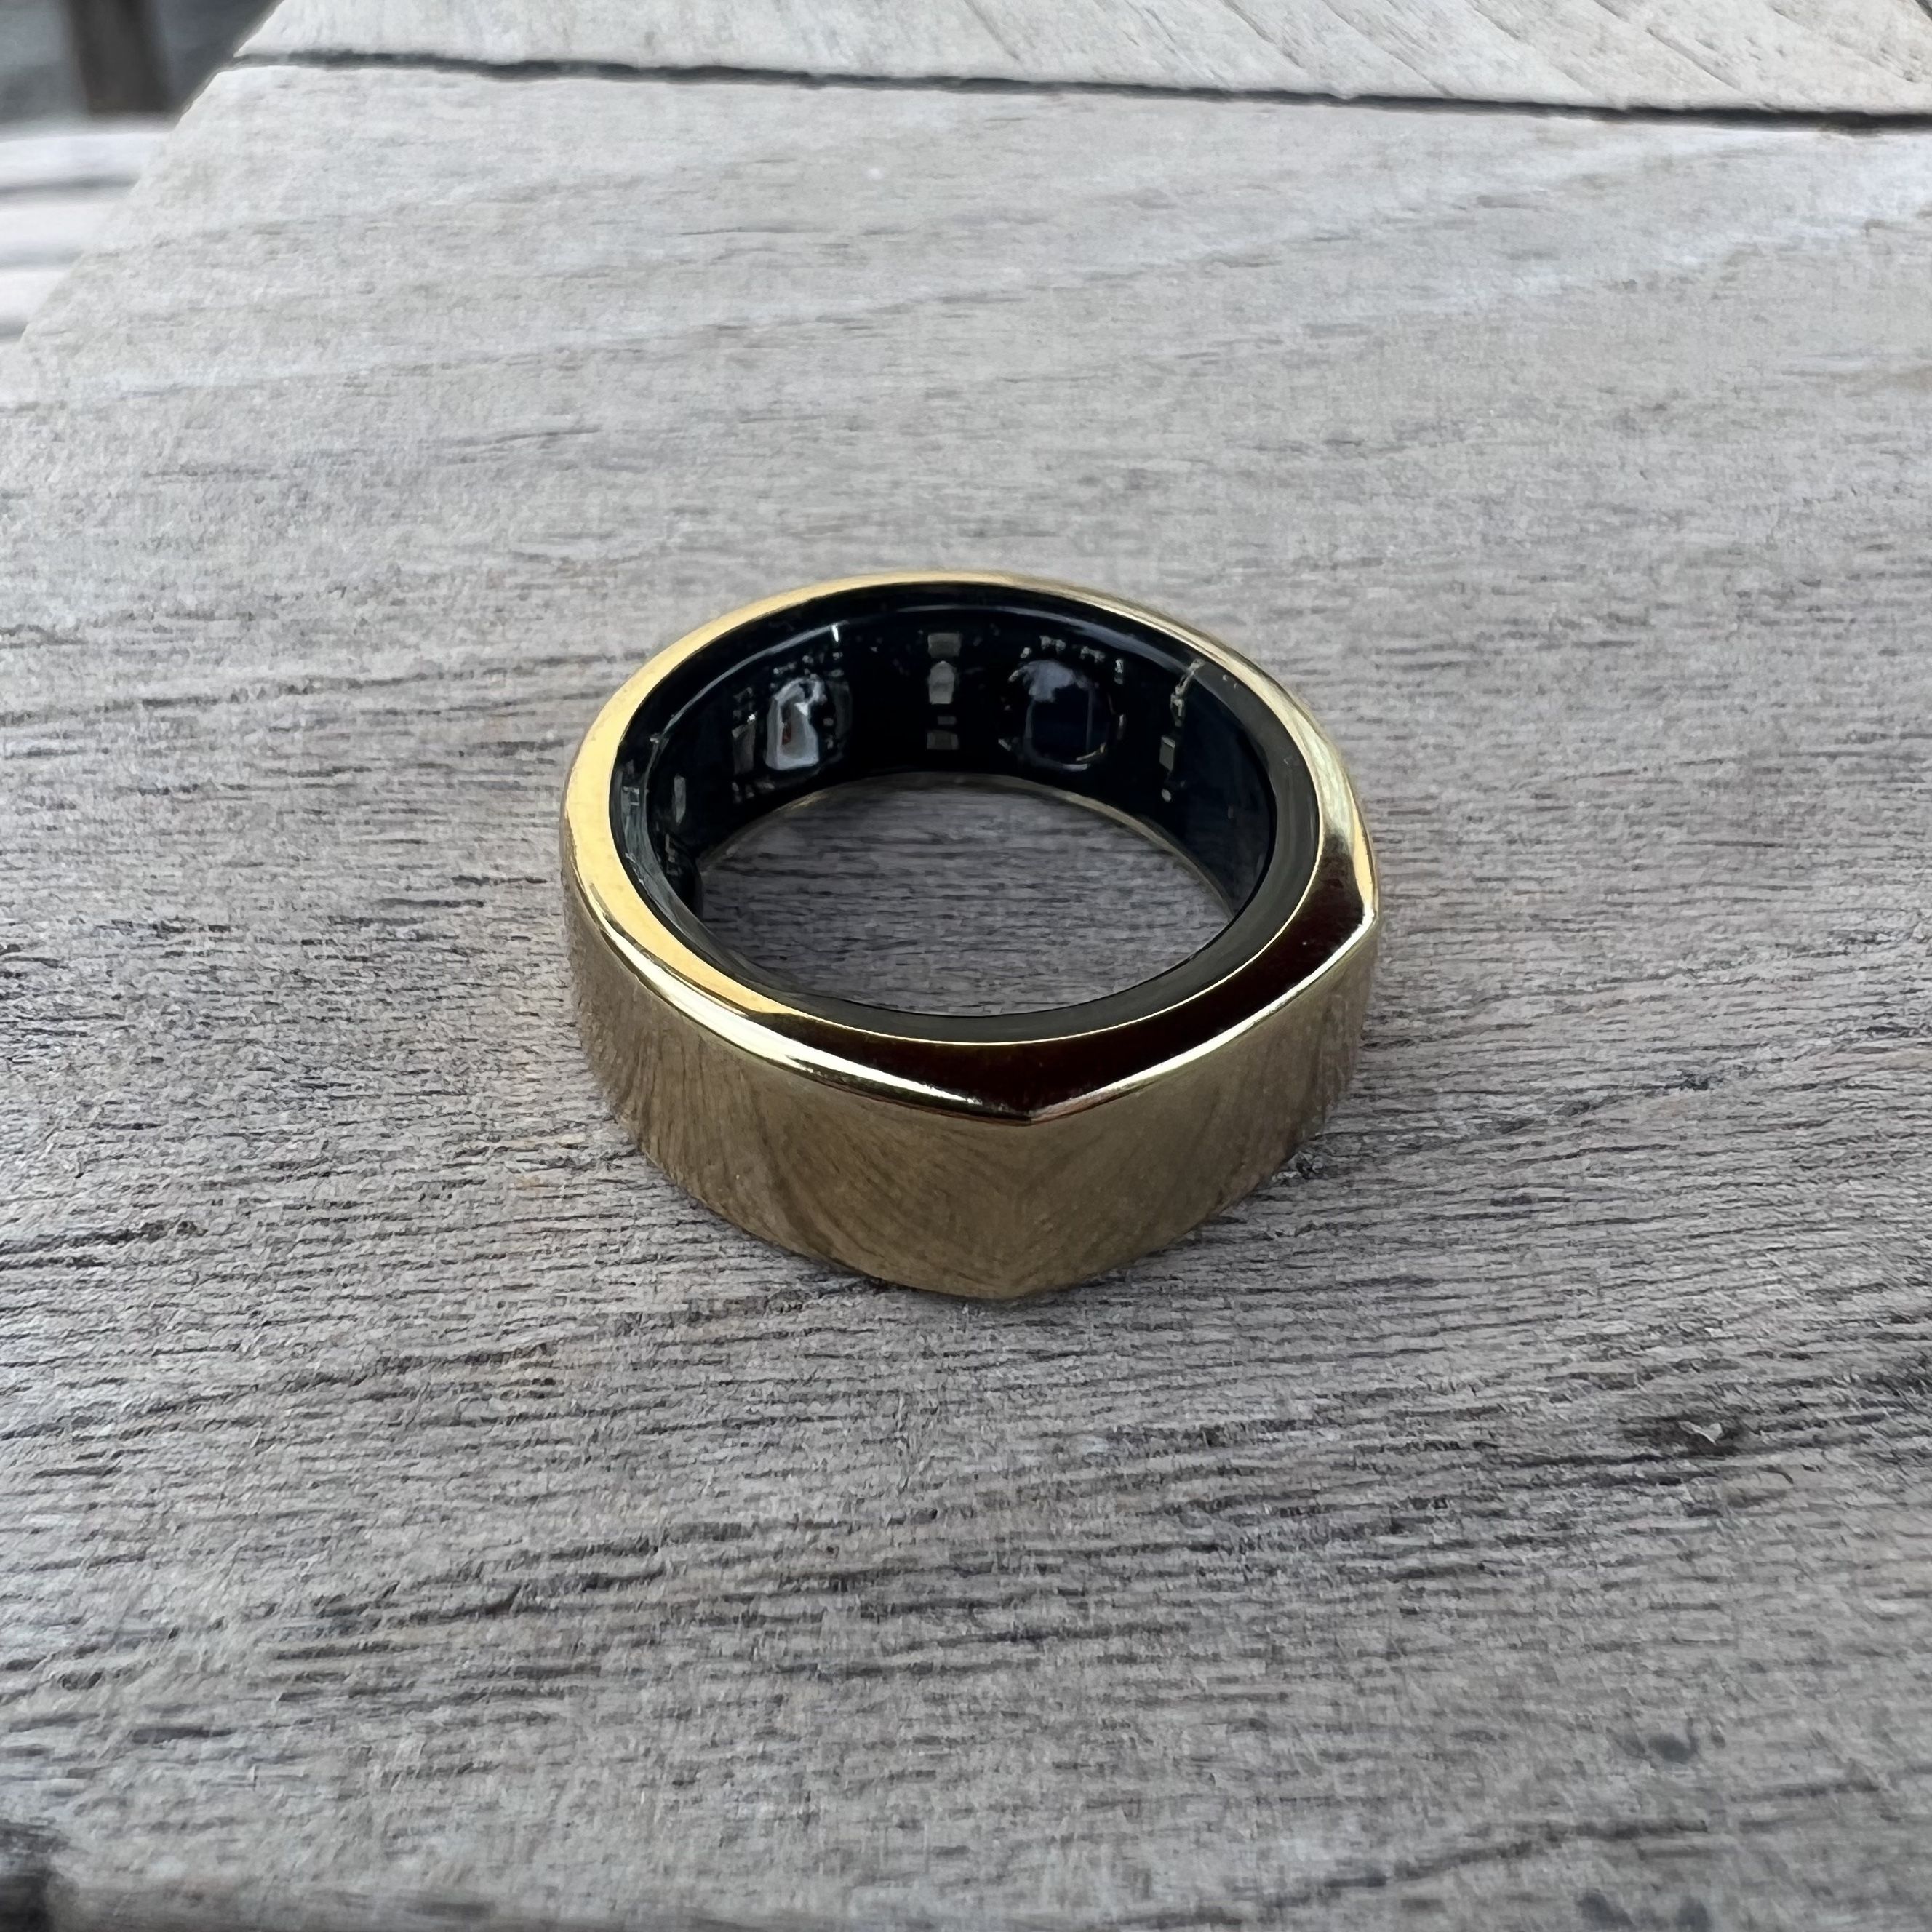 Oura Ring review: I tried the revolutionary health tracker and it changed  my life